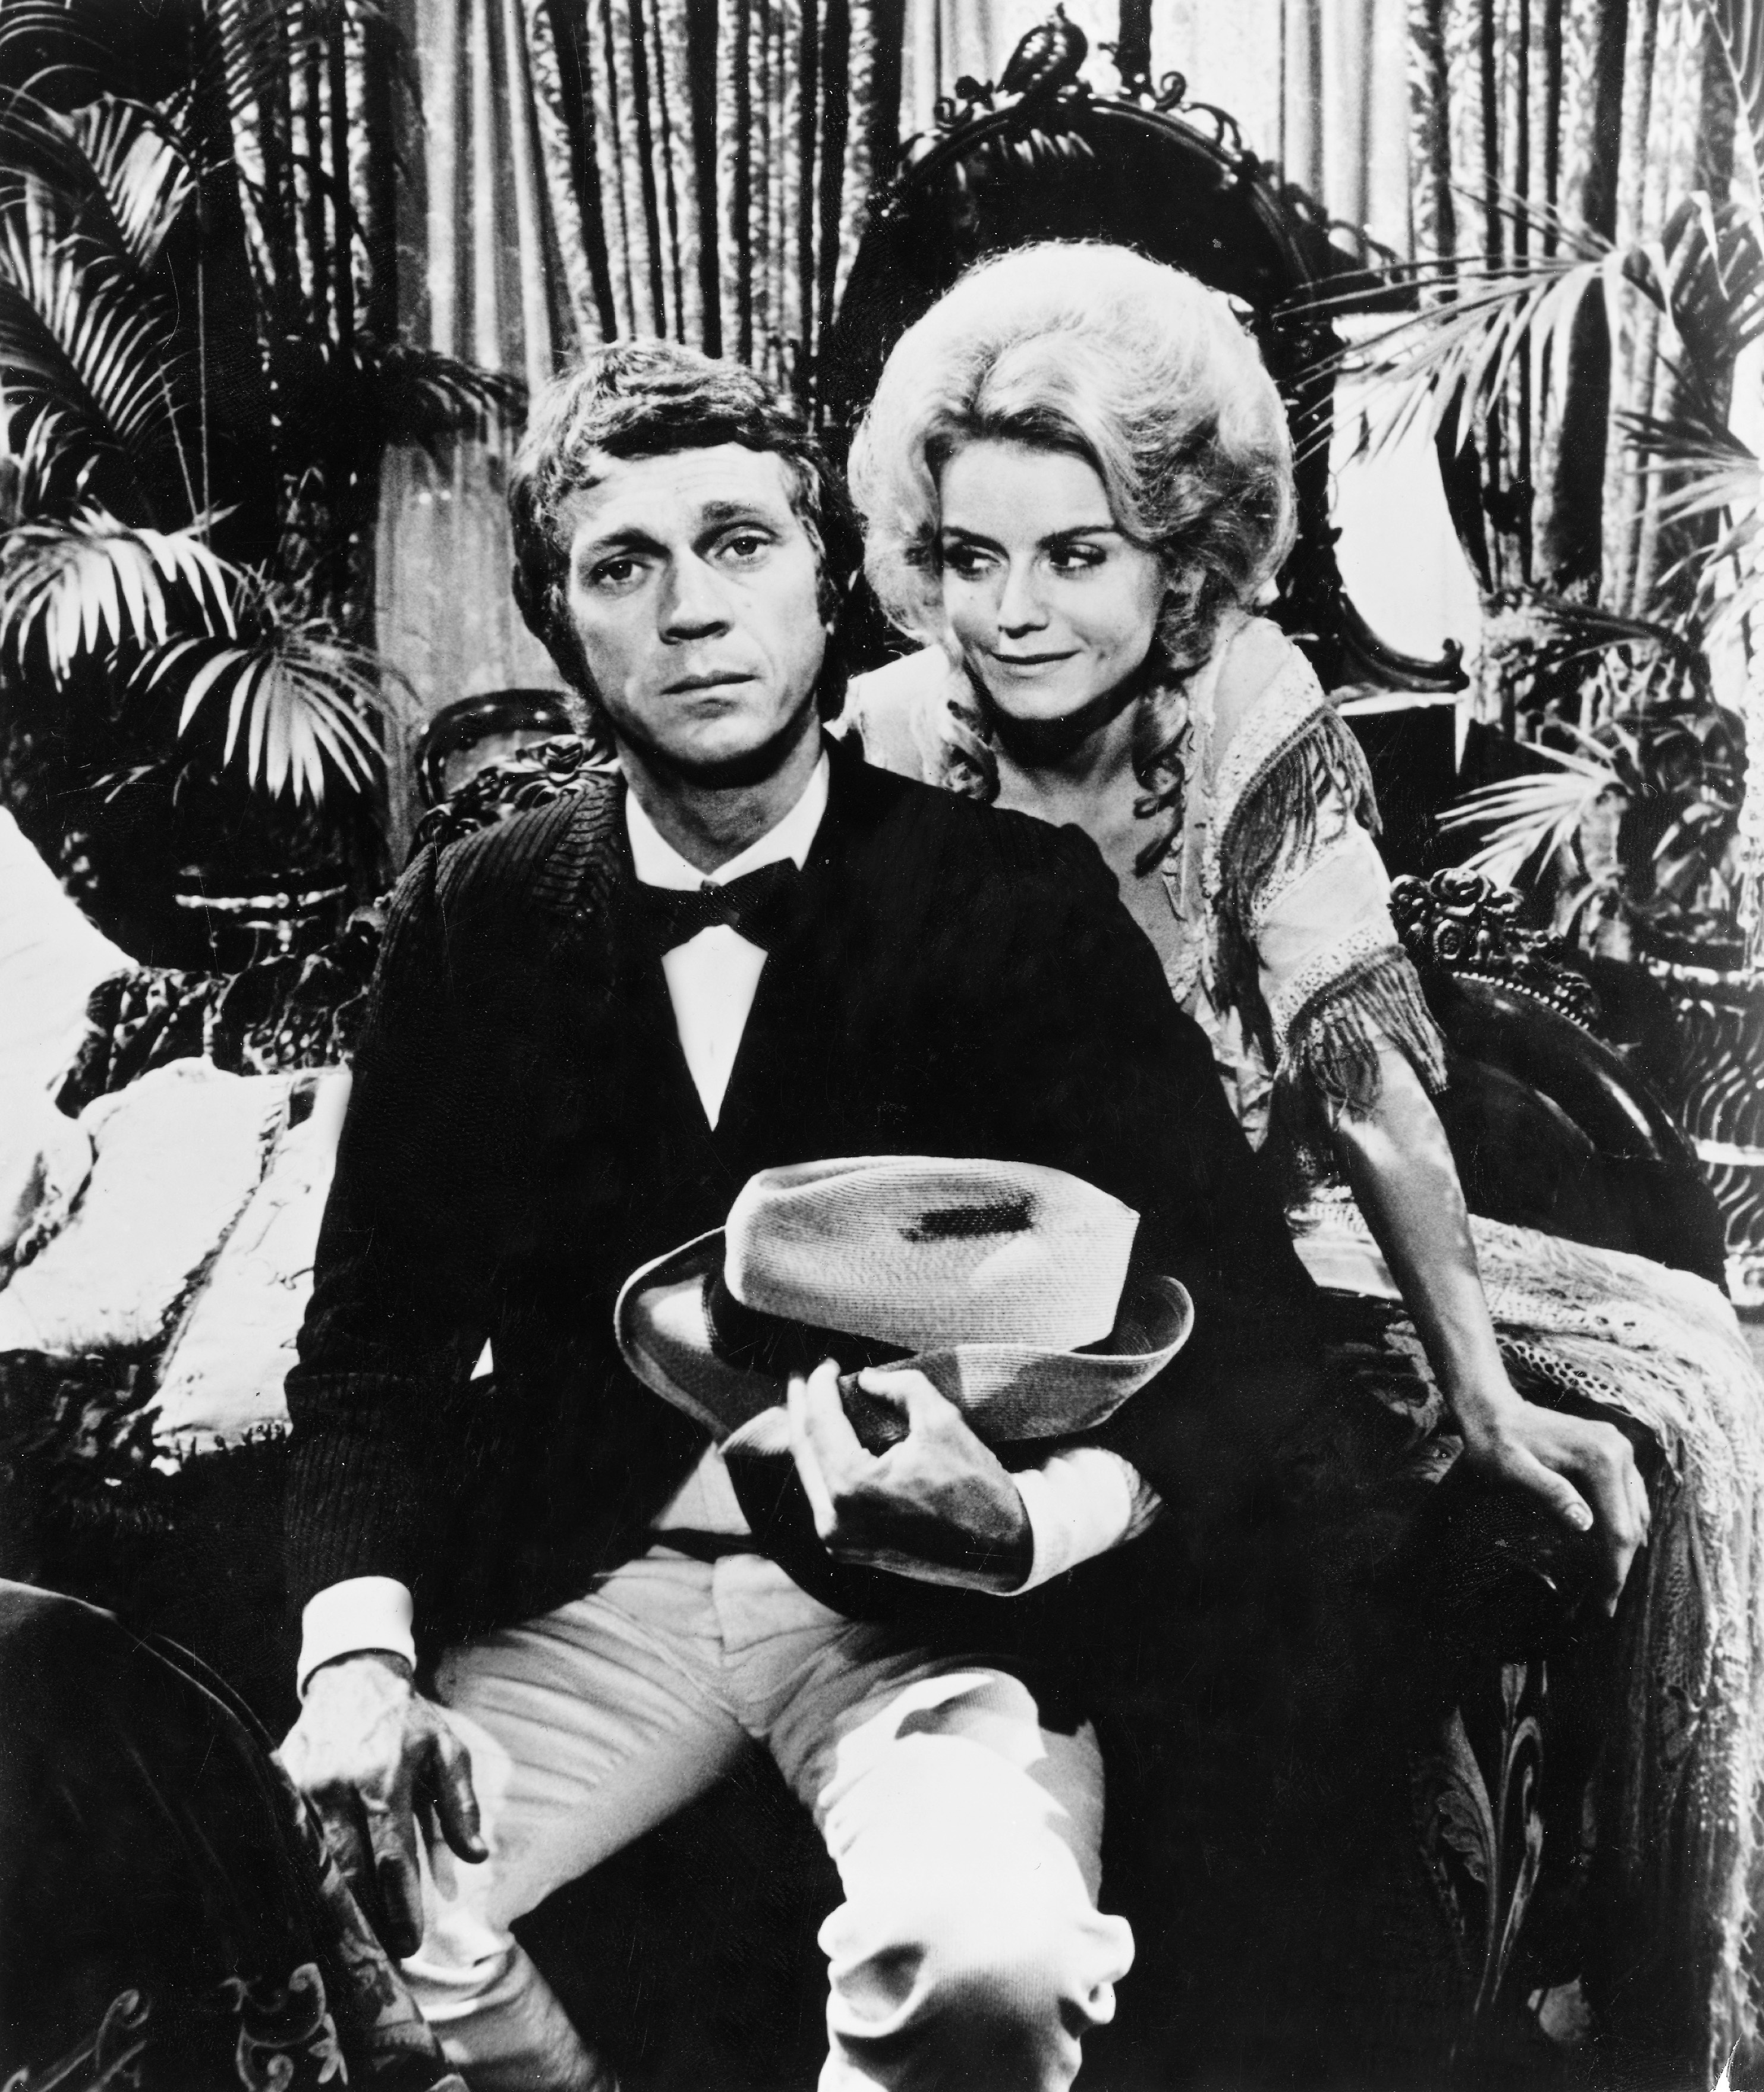 Steve McQueen und Sharon Farrell in "The Reivers" in 1969 | Quelle: Getty Images